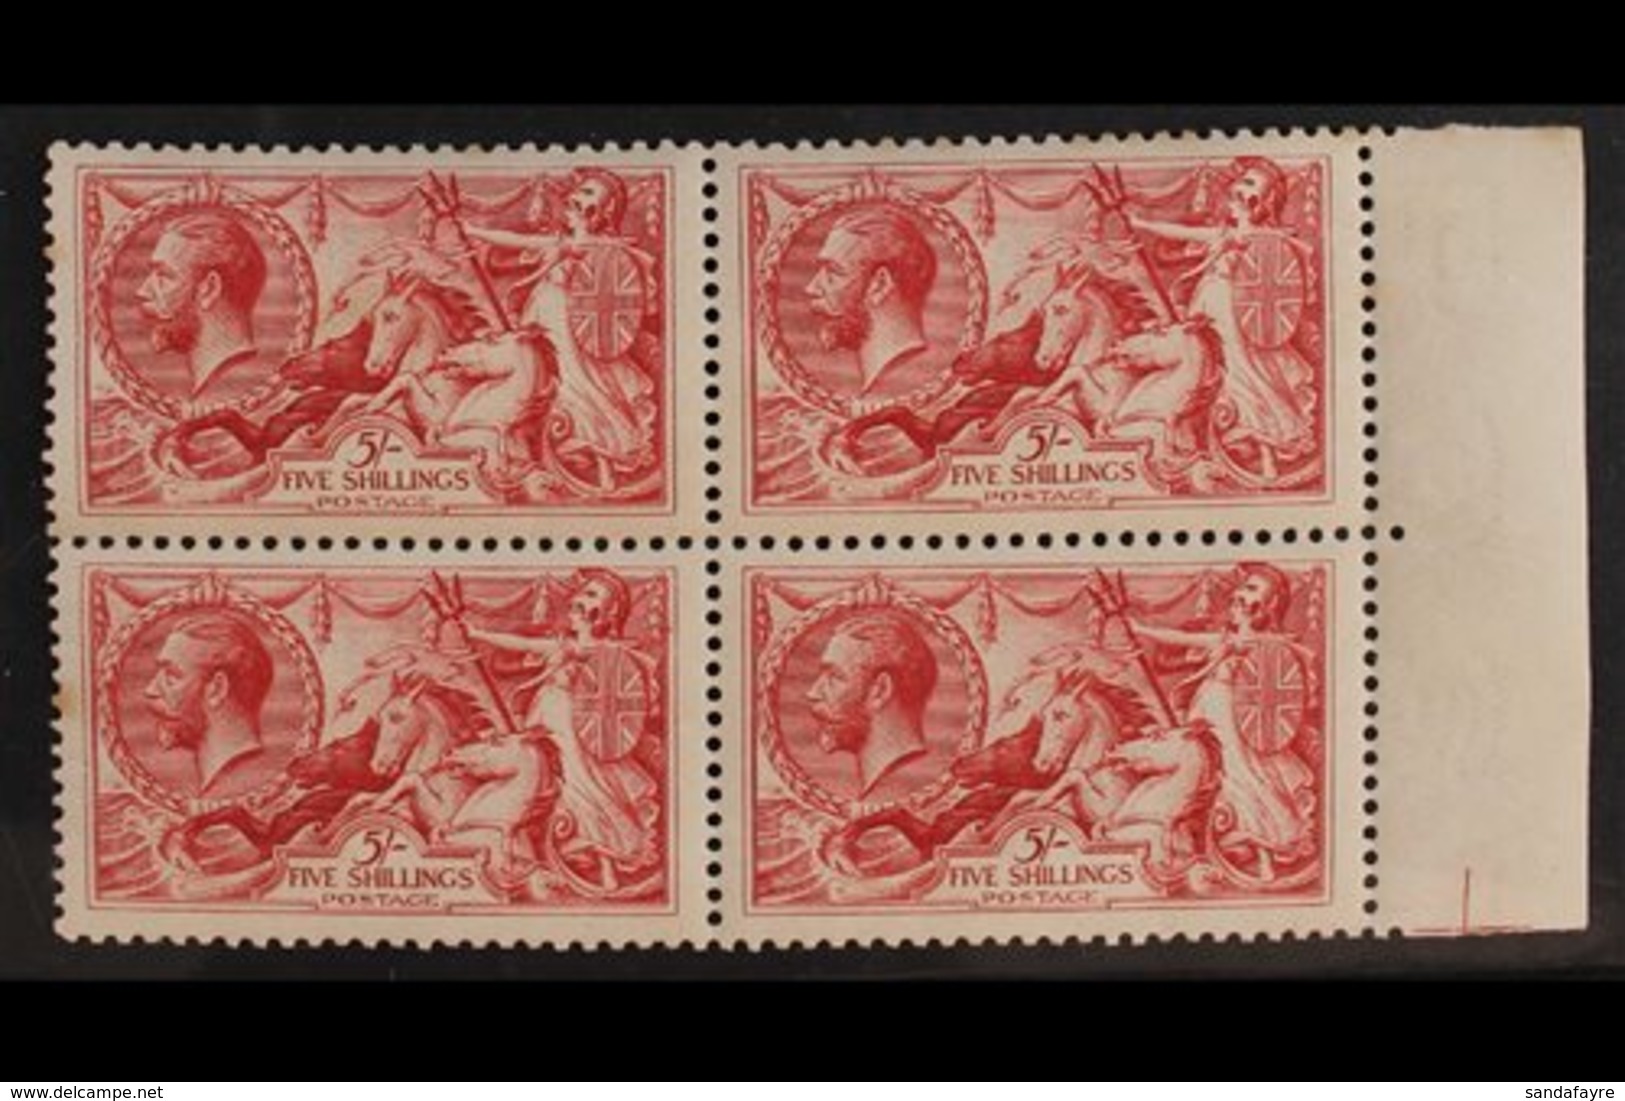 1918-19 5s Rose-red Bradbury Seahorse, SG 416, Never Hinged BLOCK OF FOUR From The Right Side Of The Sheet, Three Stamps - Unclassified